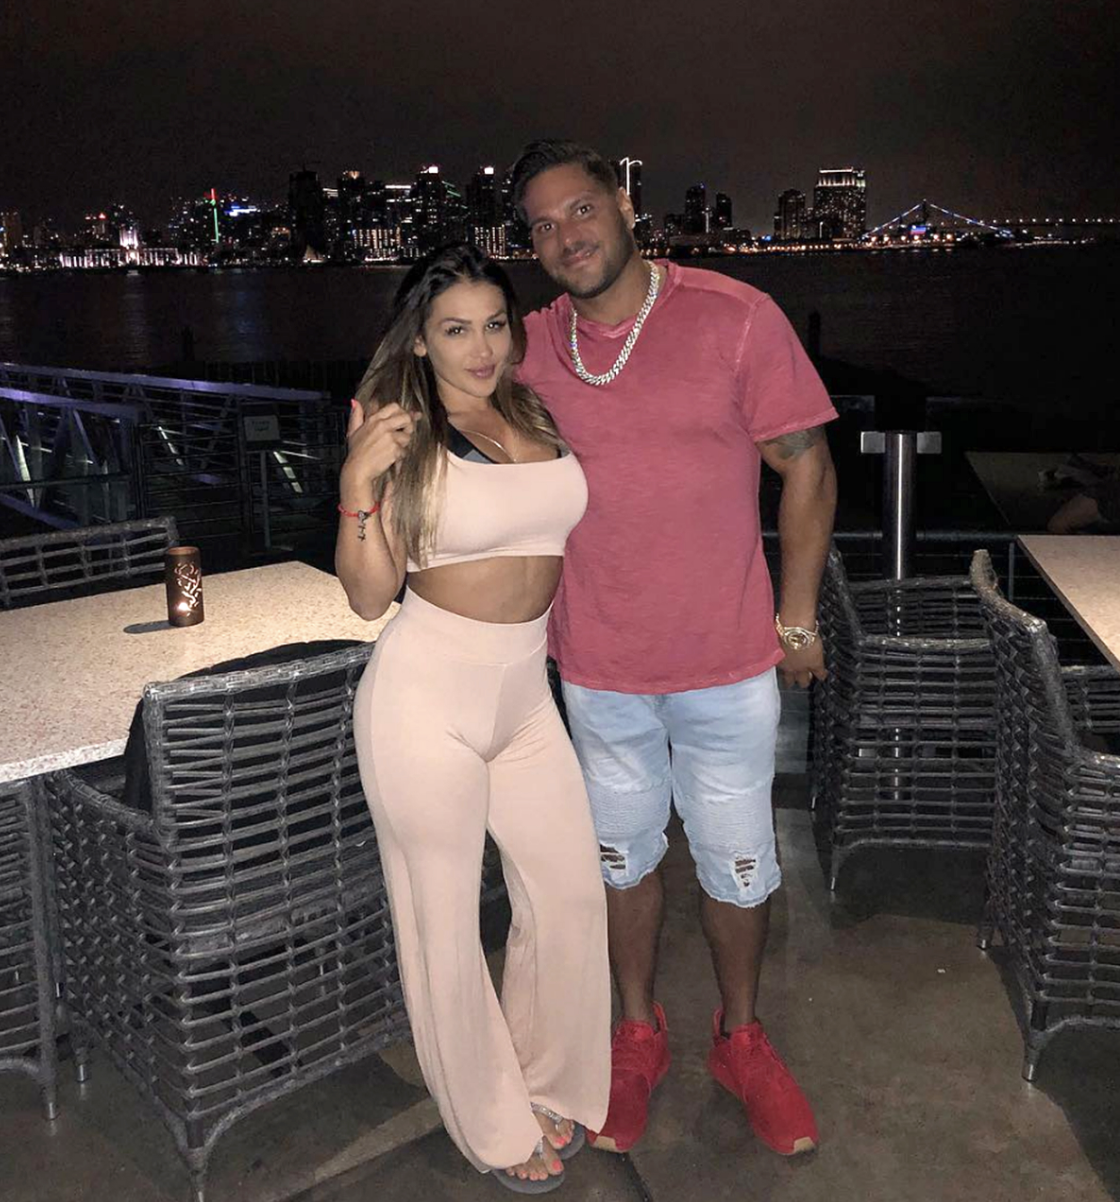 Jen Harley and Ronnie Ortiz-Magro pose together. (Photo: Instagram/Jen Harley)